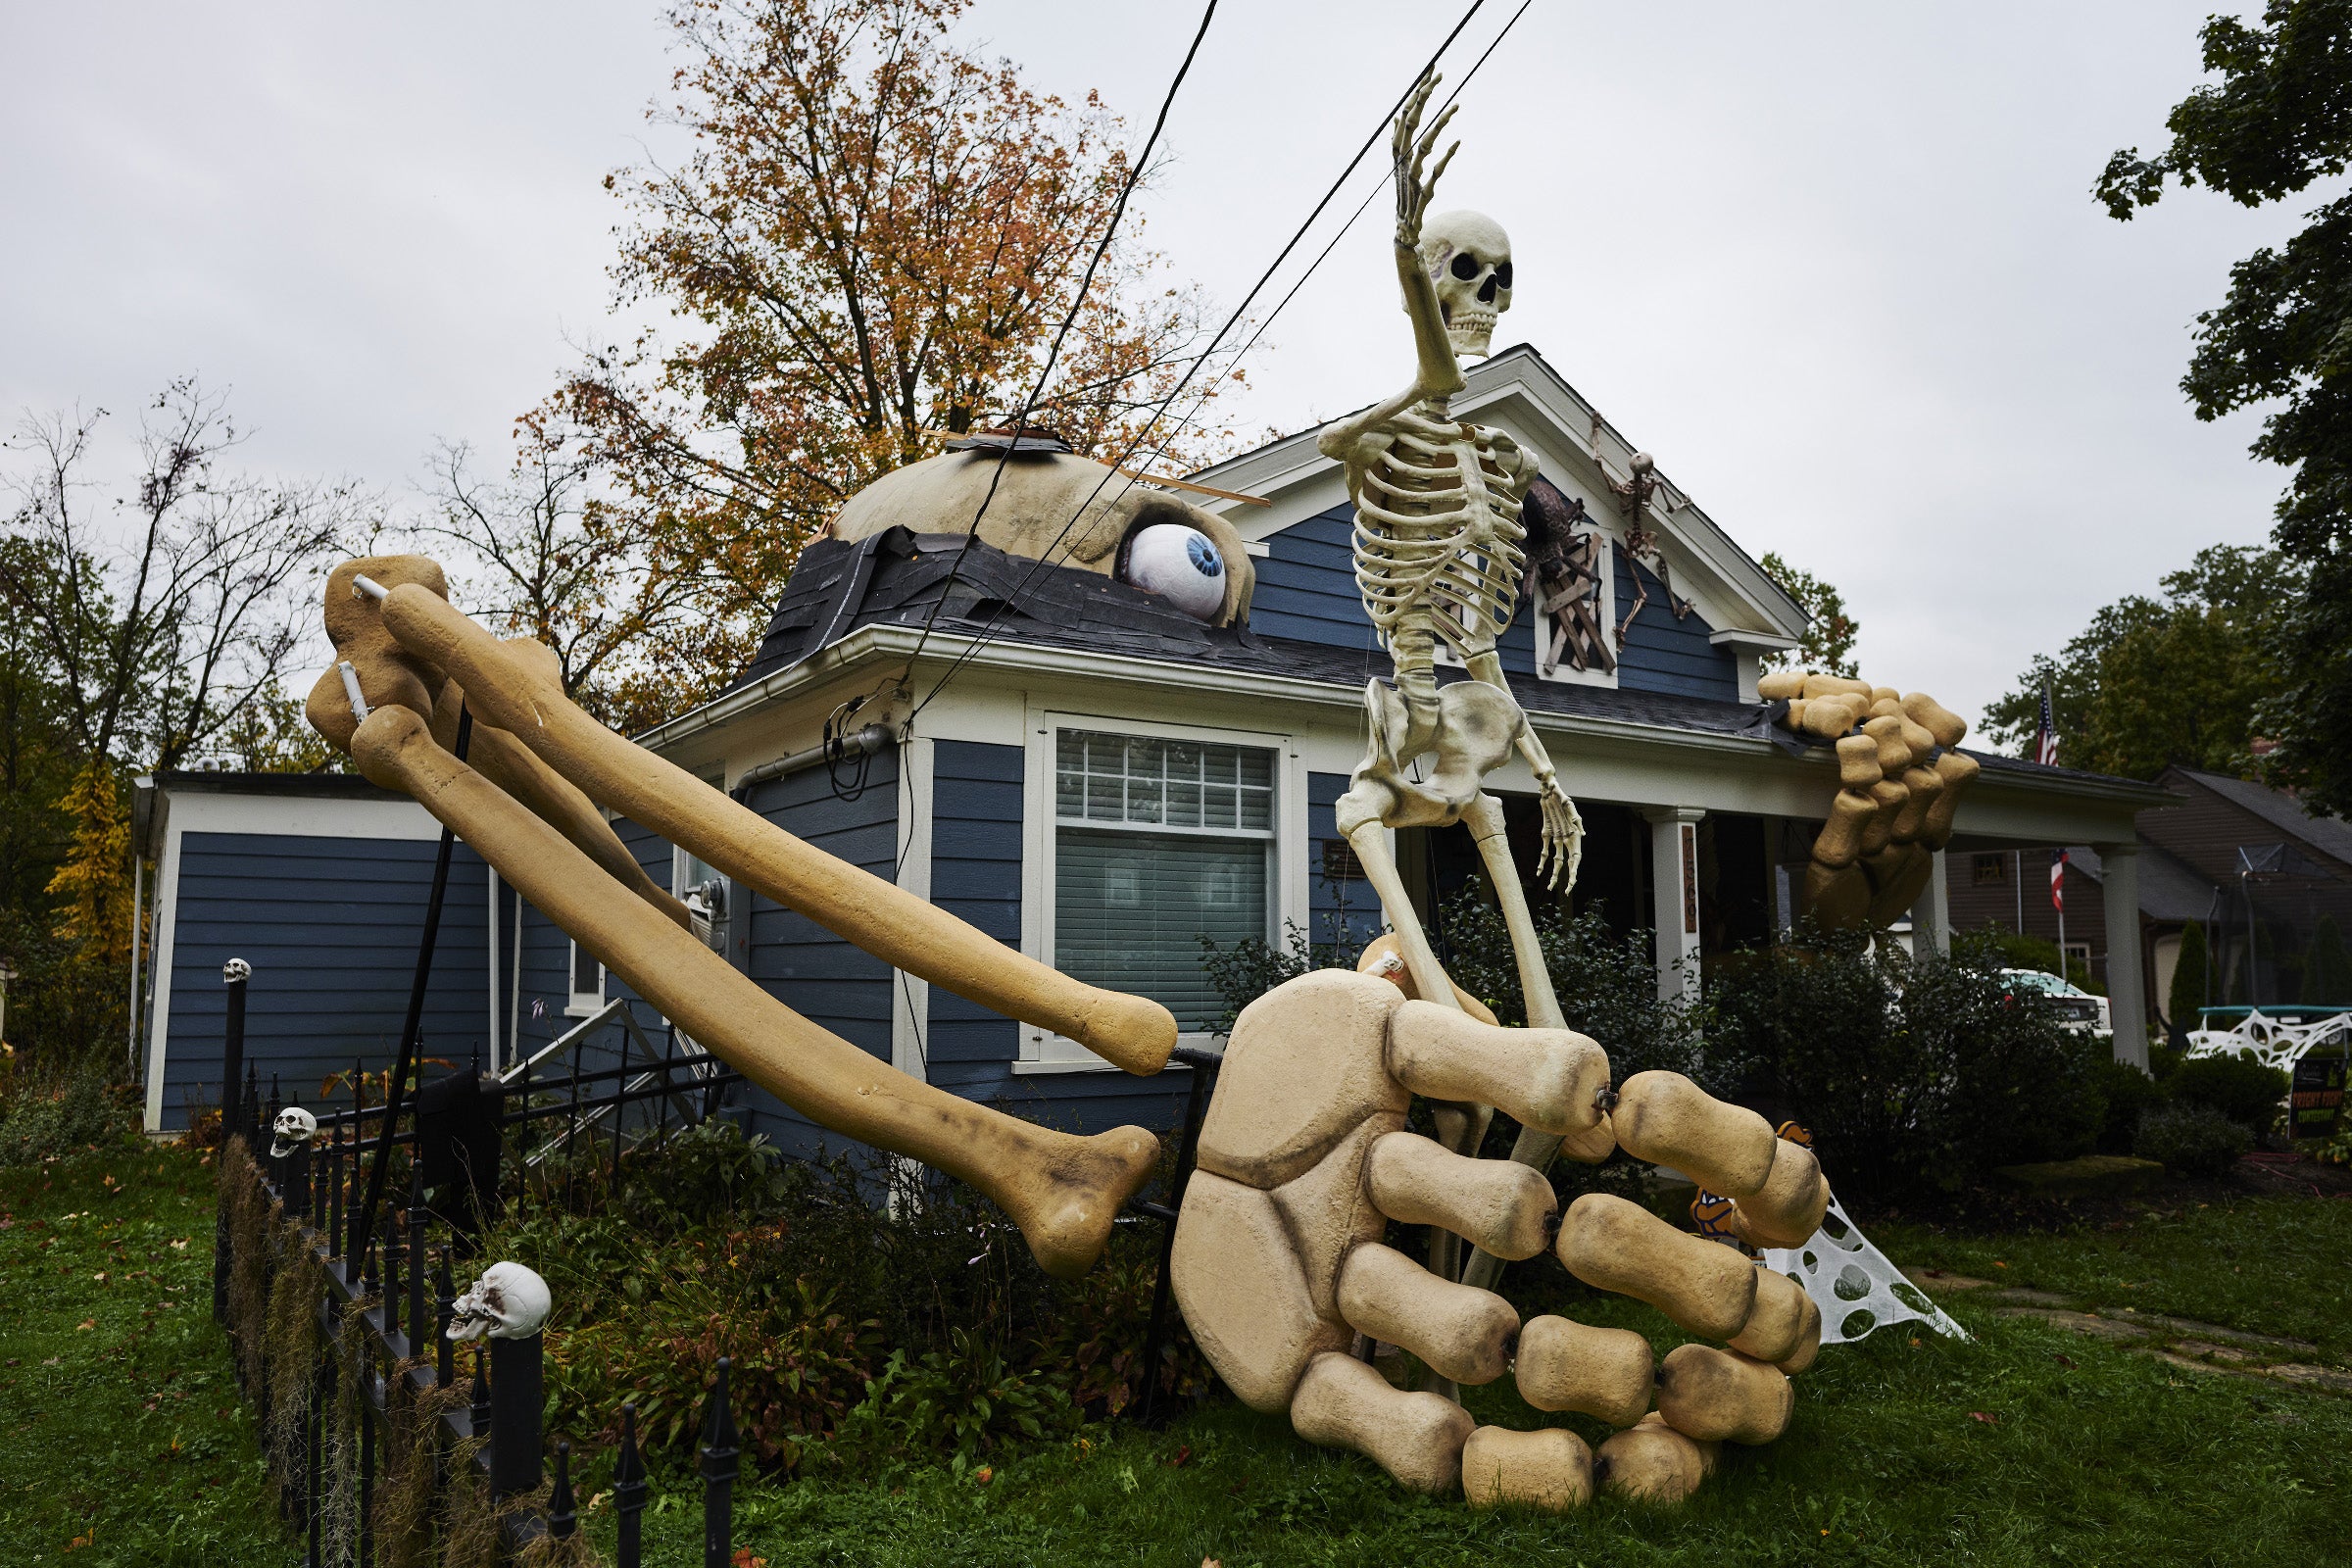 With huge skeletons, the yard-decorating arms race heats up